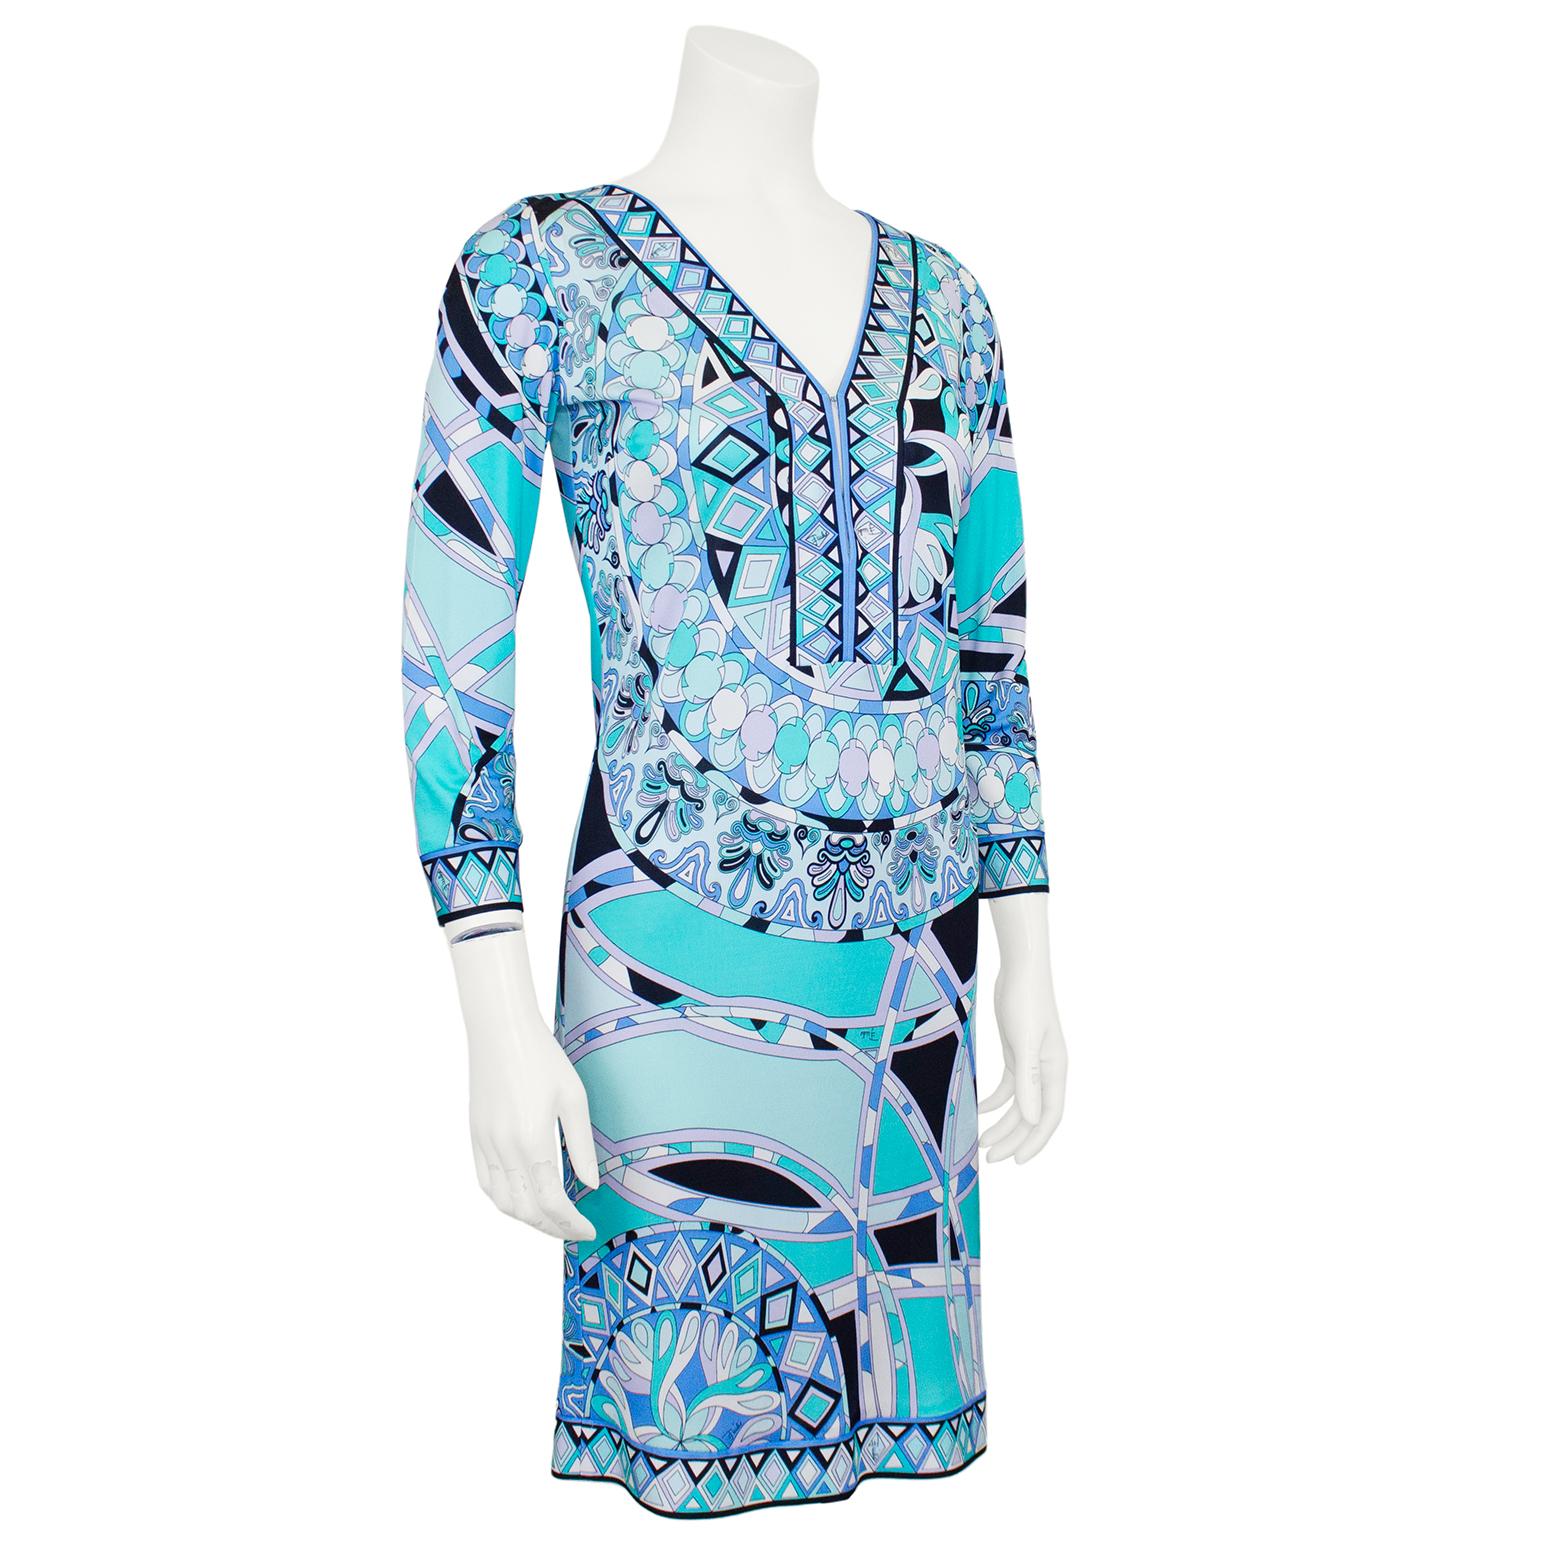 Lovely lycra printed Emilio Pucci dress from the early 2000s. abstract geometric print in shades of blue, periwinkle and turquoise with contrasting white and black. V neckline with hook and eye closures and 3/4 length sleeves. No zipper, must to put